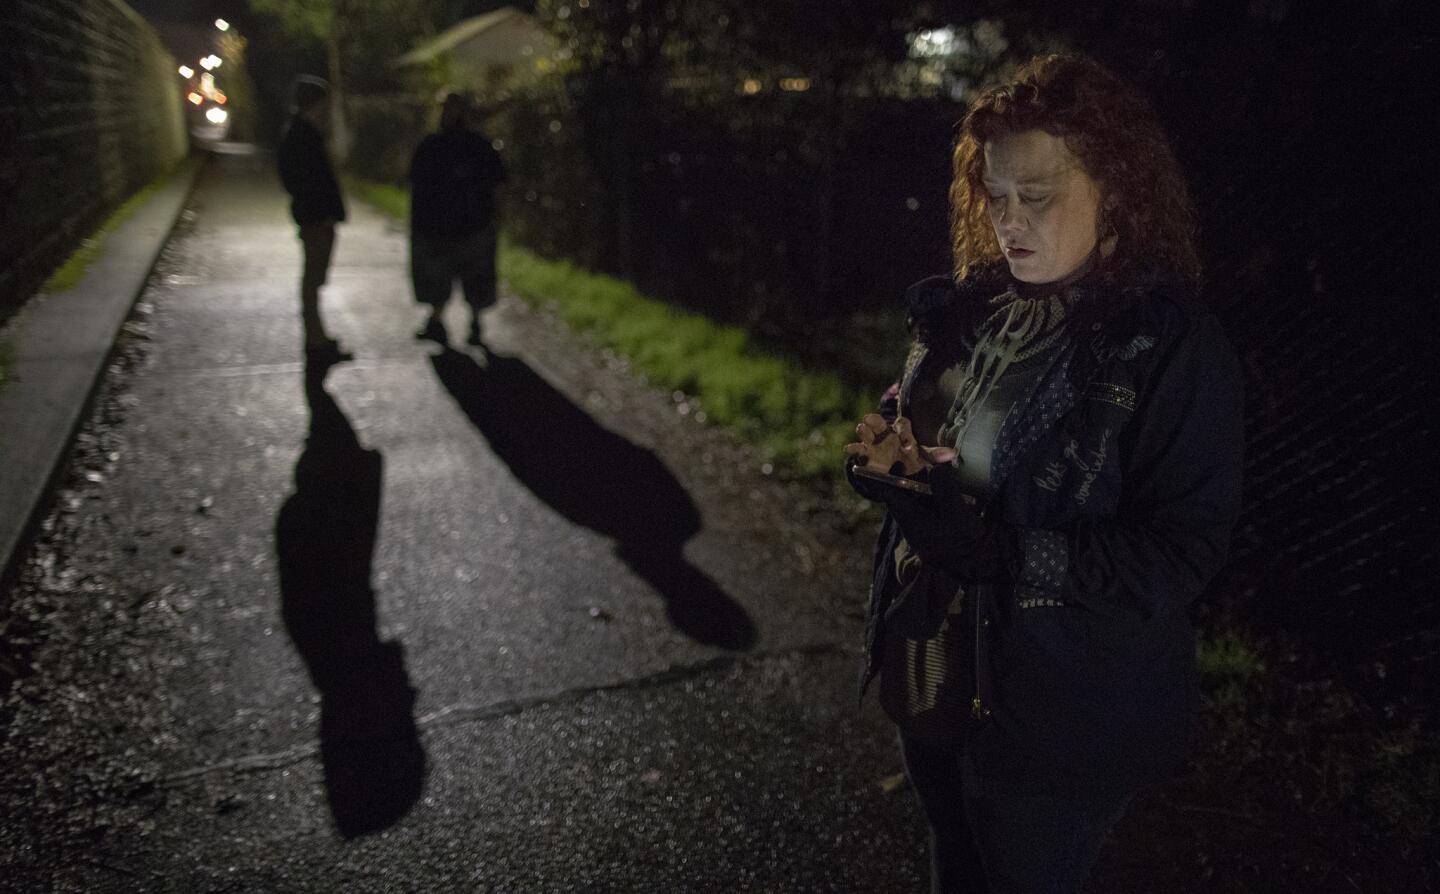 Montavilla Initiative chairwoman Angela Todd sends a text message while on patrol along a multi-use path in a neighborhood where a homeless encampment was recently cleared in Portland, Ore.